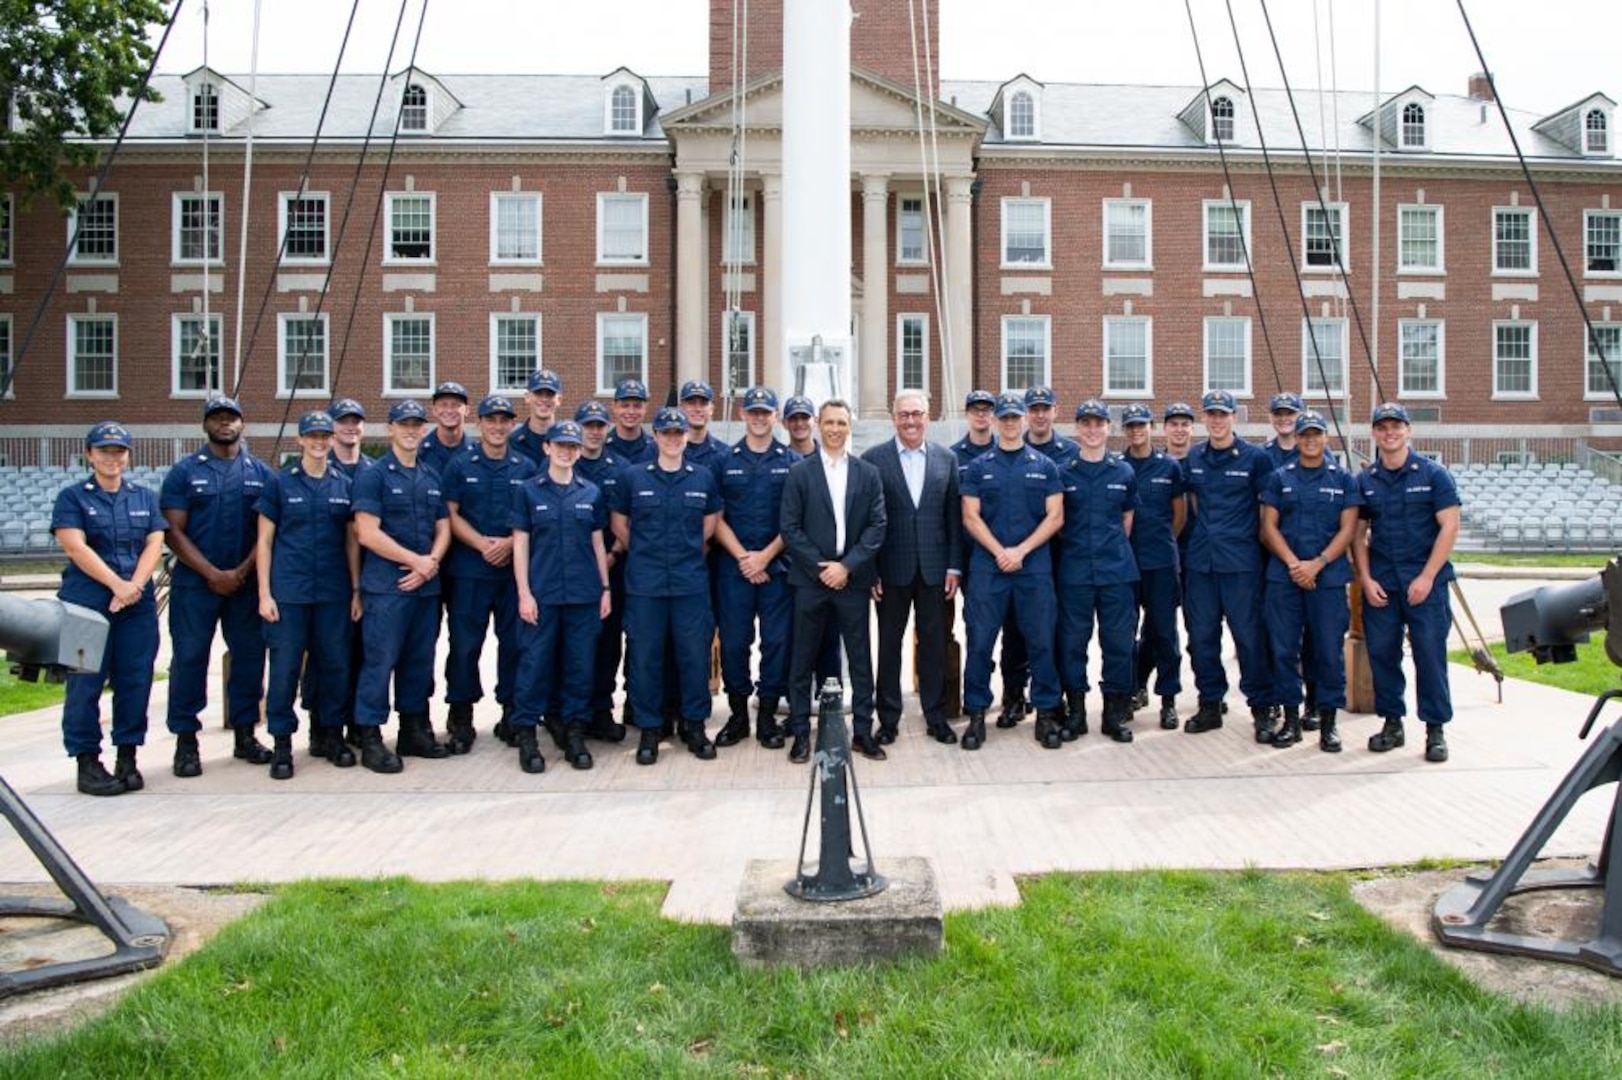 James Pitaro (center left), President of ESPN and Sal Paolantonio (center right), ESPN reporter, pose for a group photo with cadets from the U.S. Coast Guard Academy, here, Sep. 28, 2021. ESPN was filming with the Coast Guard for their annual Veterans Day special, this year's special is focused on the Coast Guard. (U.S. Coast Guard photo by Petty Officer 3rd Class Matthew Abban)